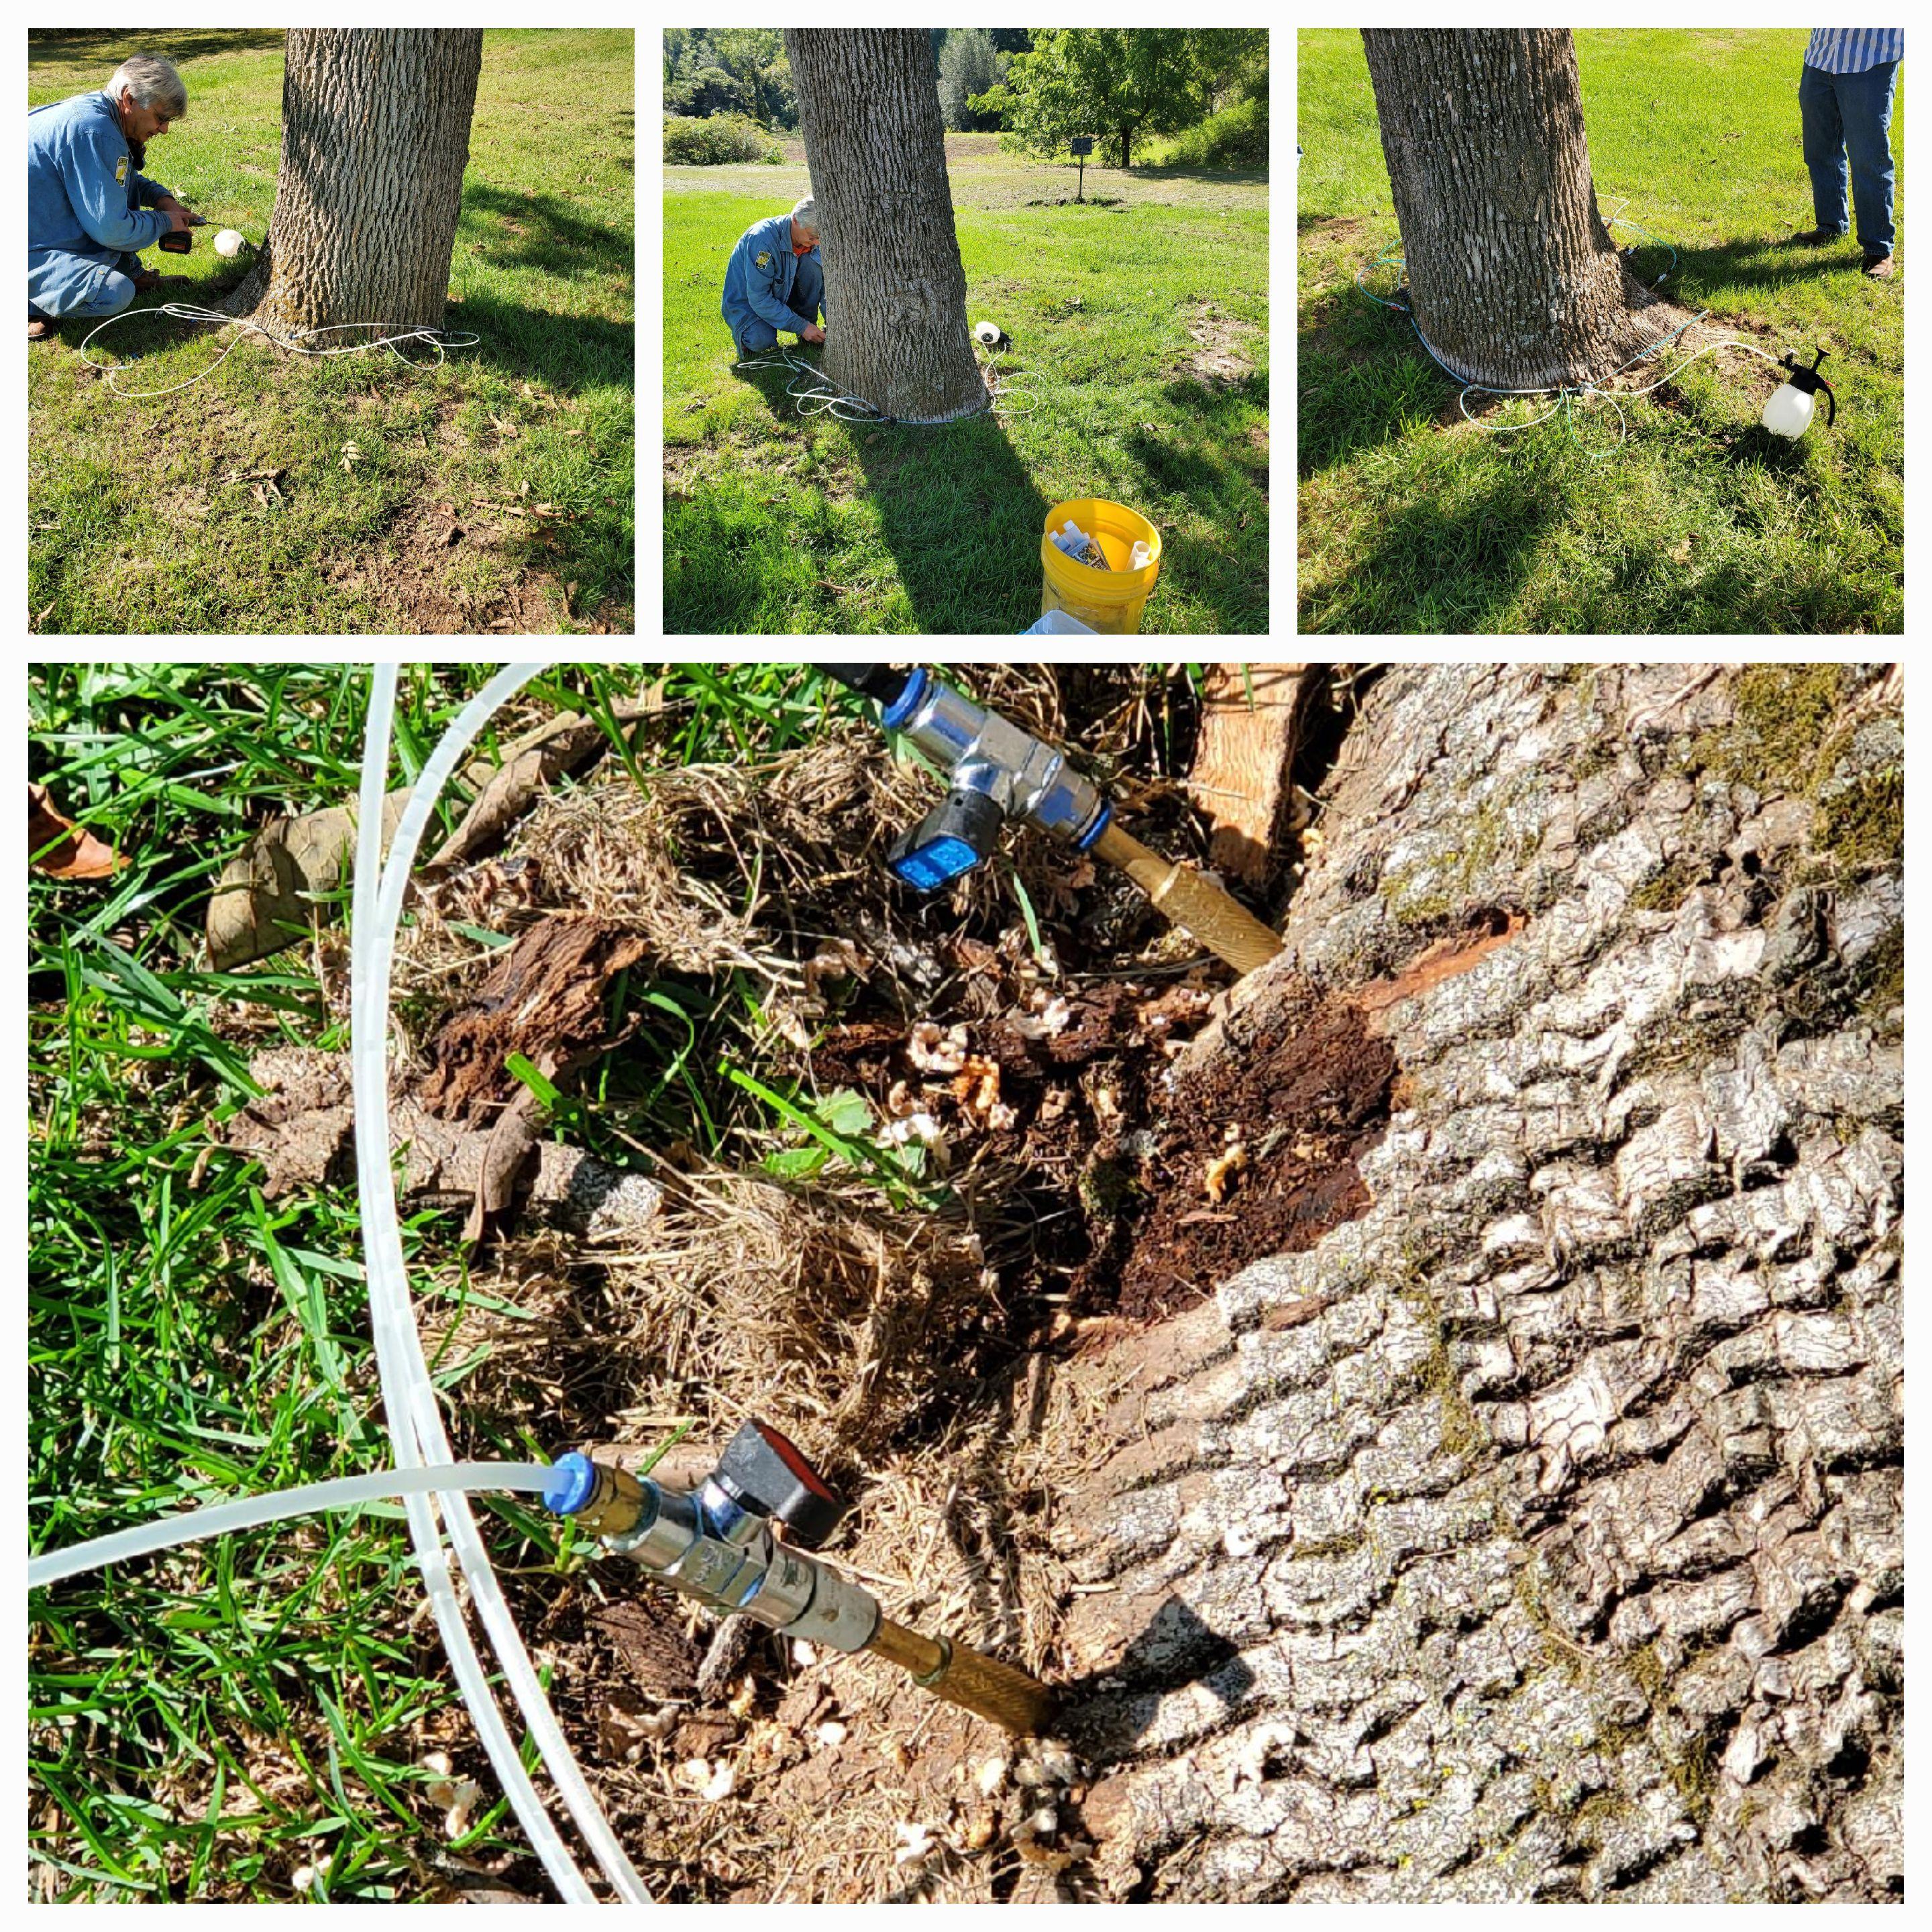 The Ash tree at the Smale house was found to have ash borer beetles. We caught it early and are having it treated.